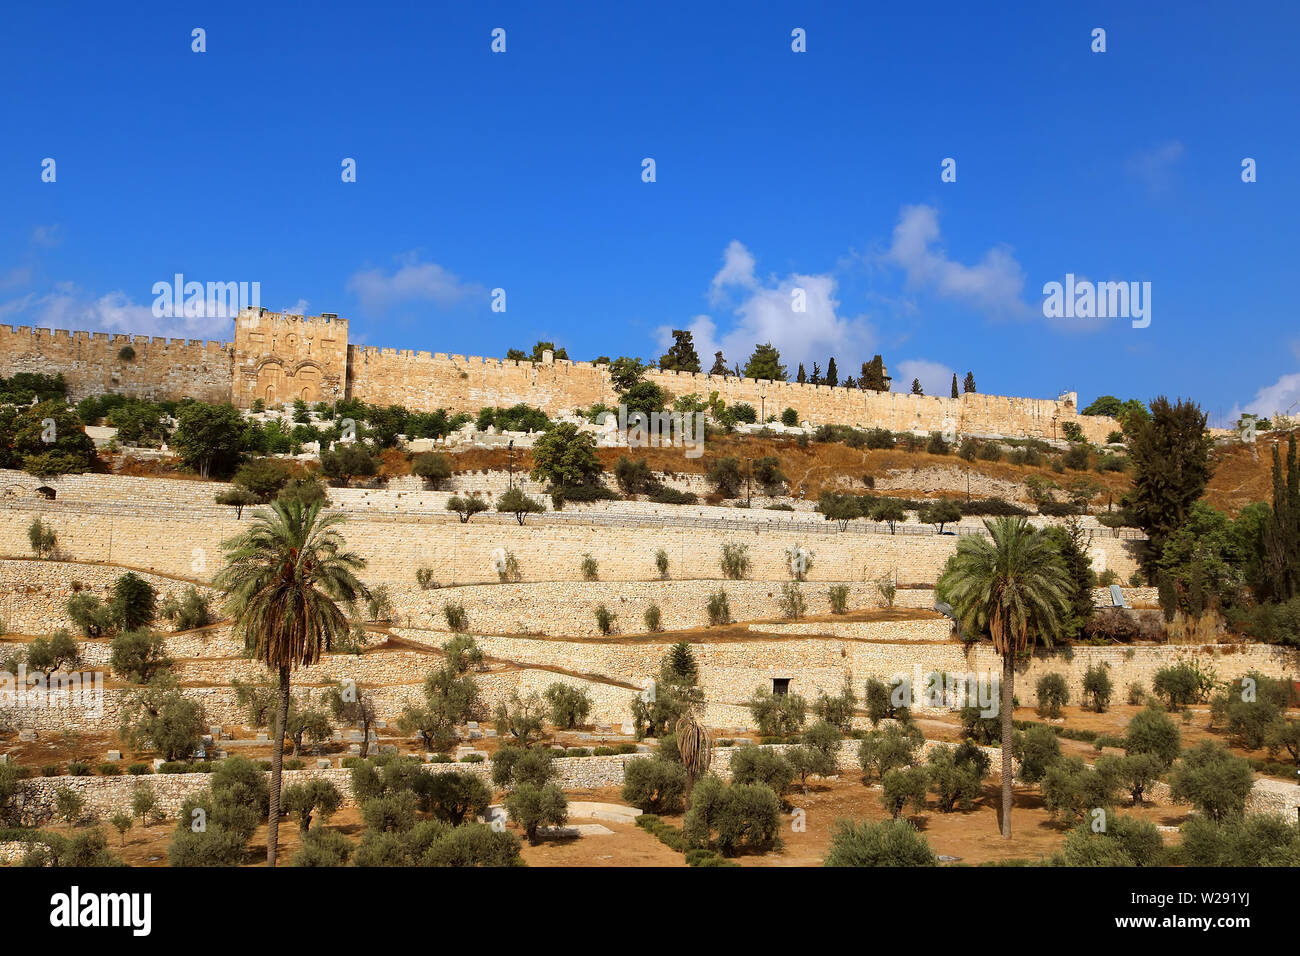 The Golden Gate or Gate of Mercy on the east-side of the Temple Mount of the Old City of Jerusalem, Israel Stock Photo